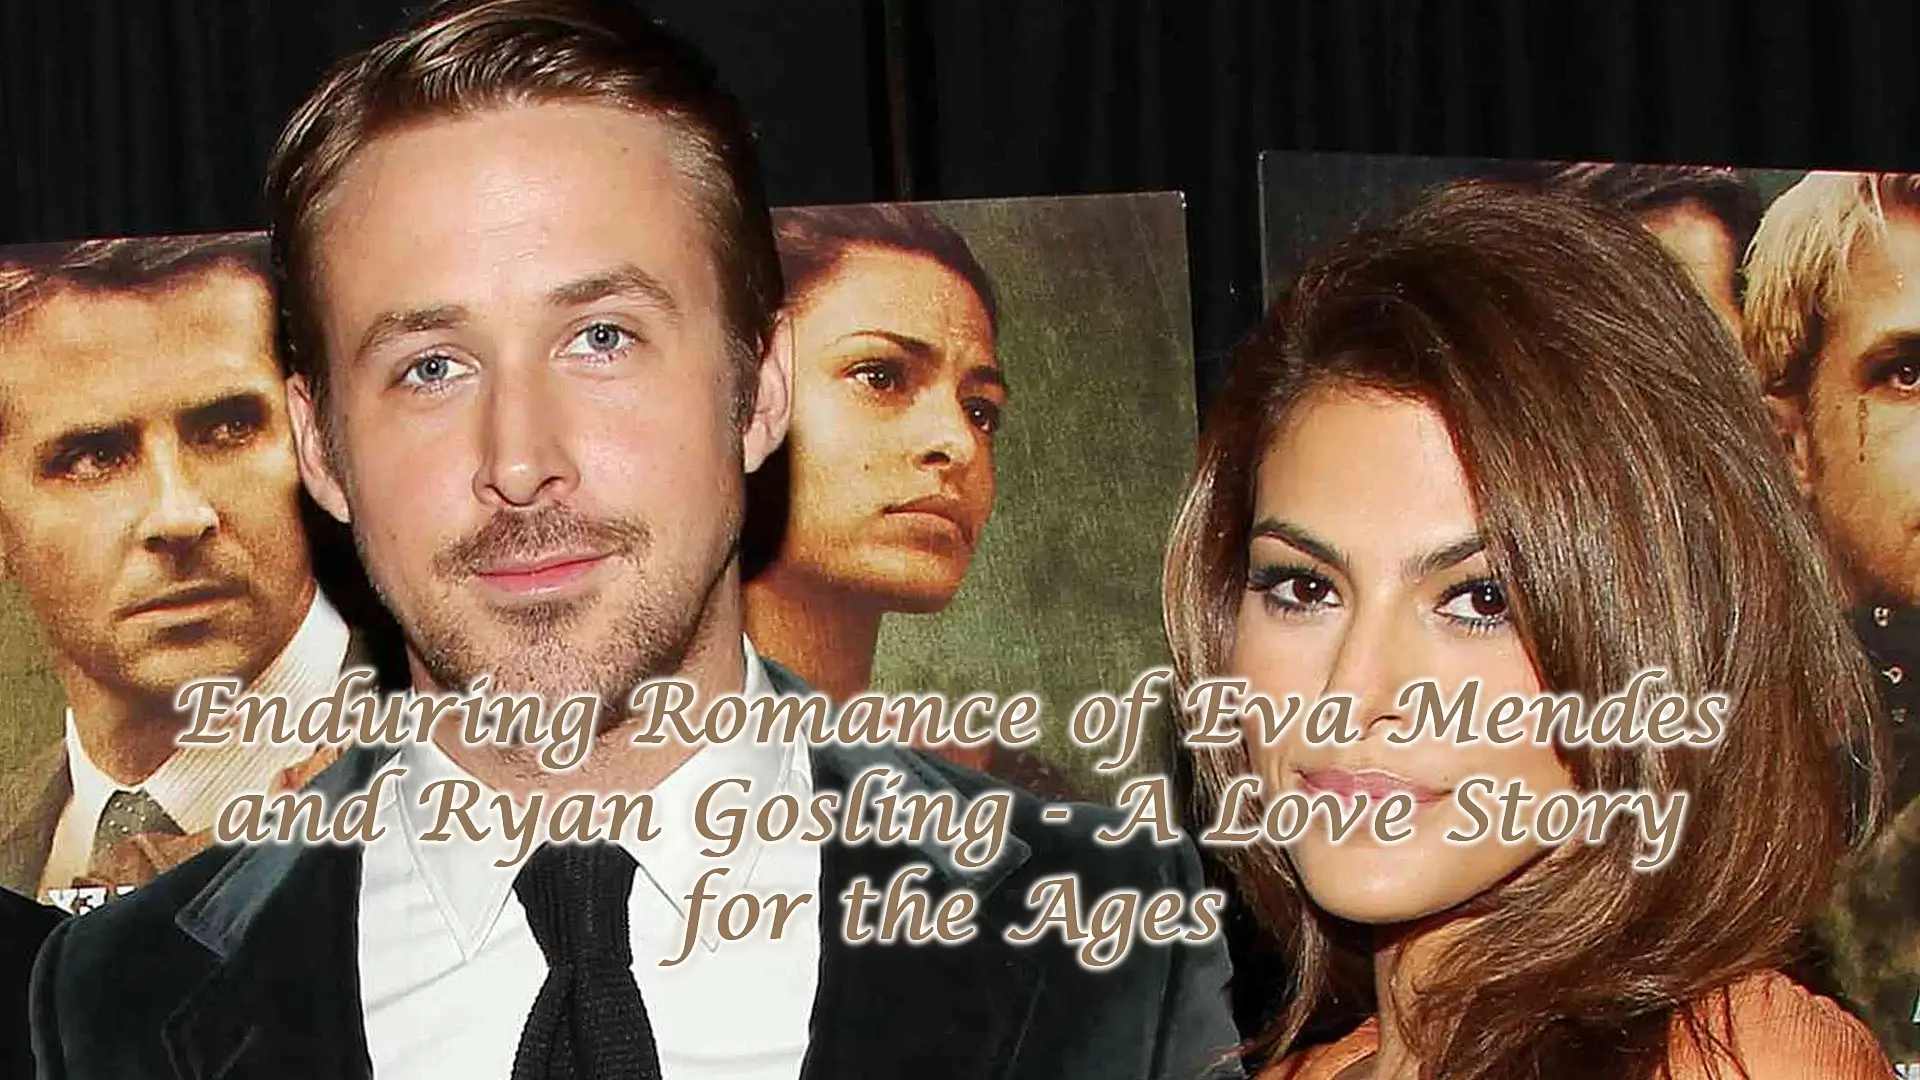 Enduring Romance of Eva Mendes and Ryan Gosling - A Love Story for the Ages